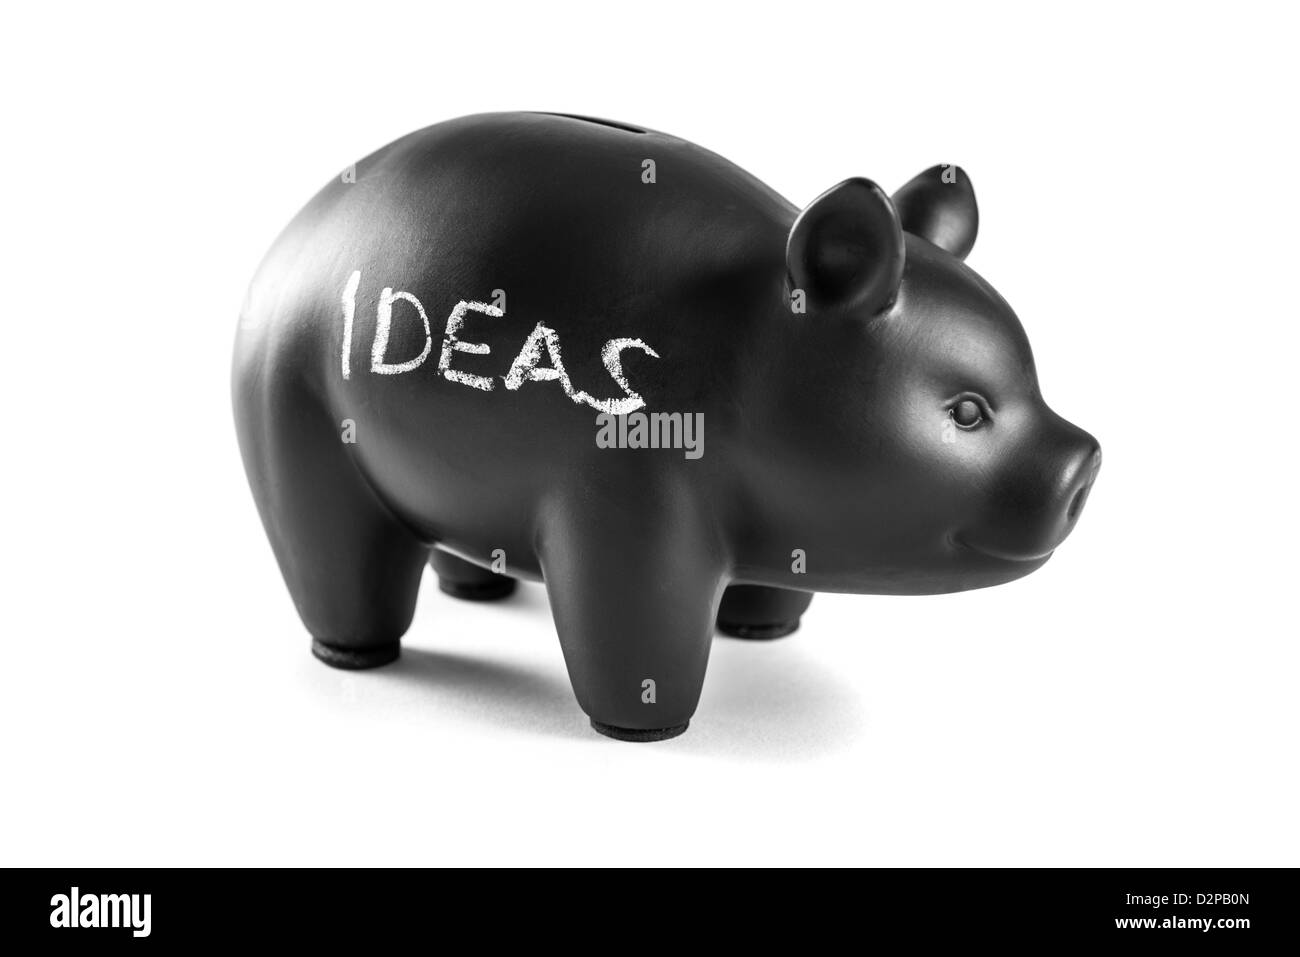 Black piggy bank on white background with 'ideas' written on it Stock Photo